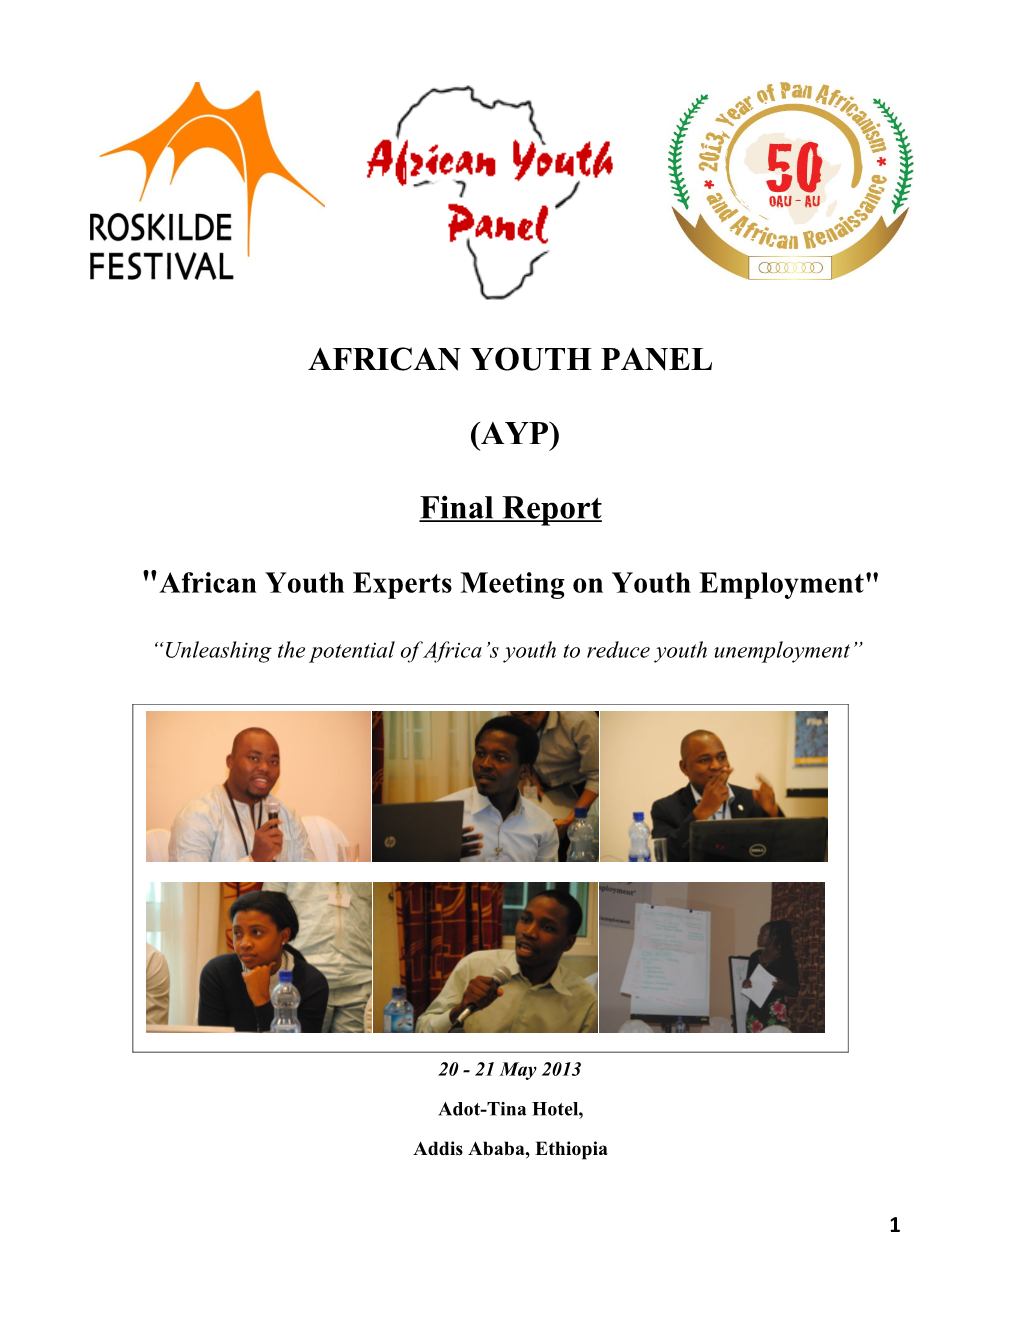 African Youth Experts Meeting on Youth Employment